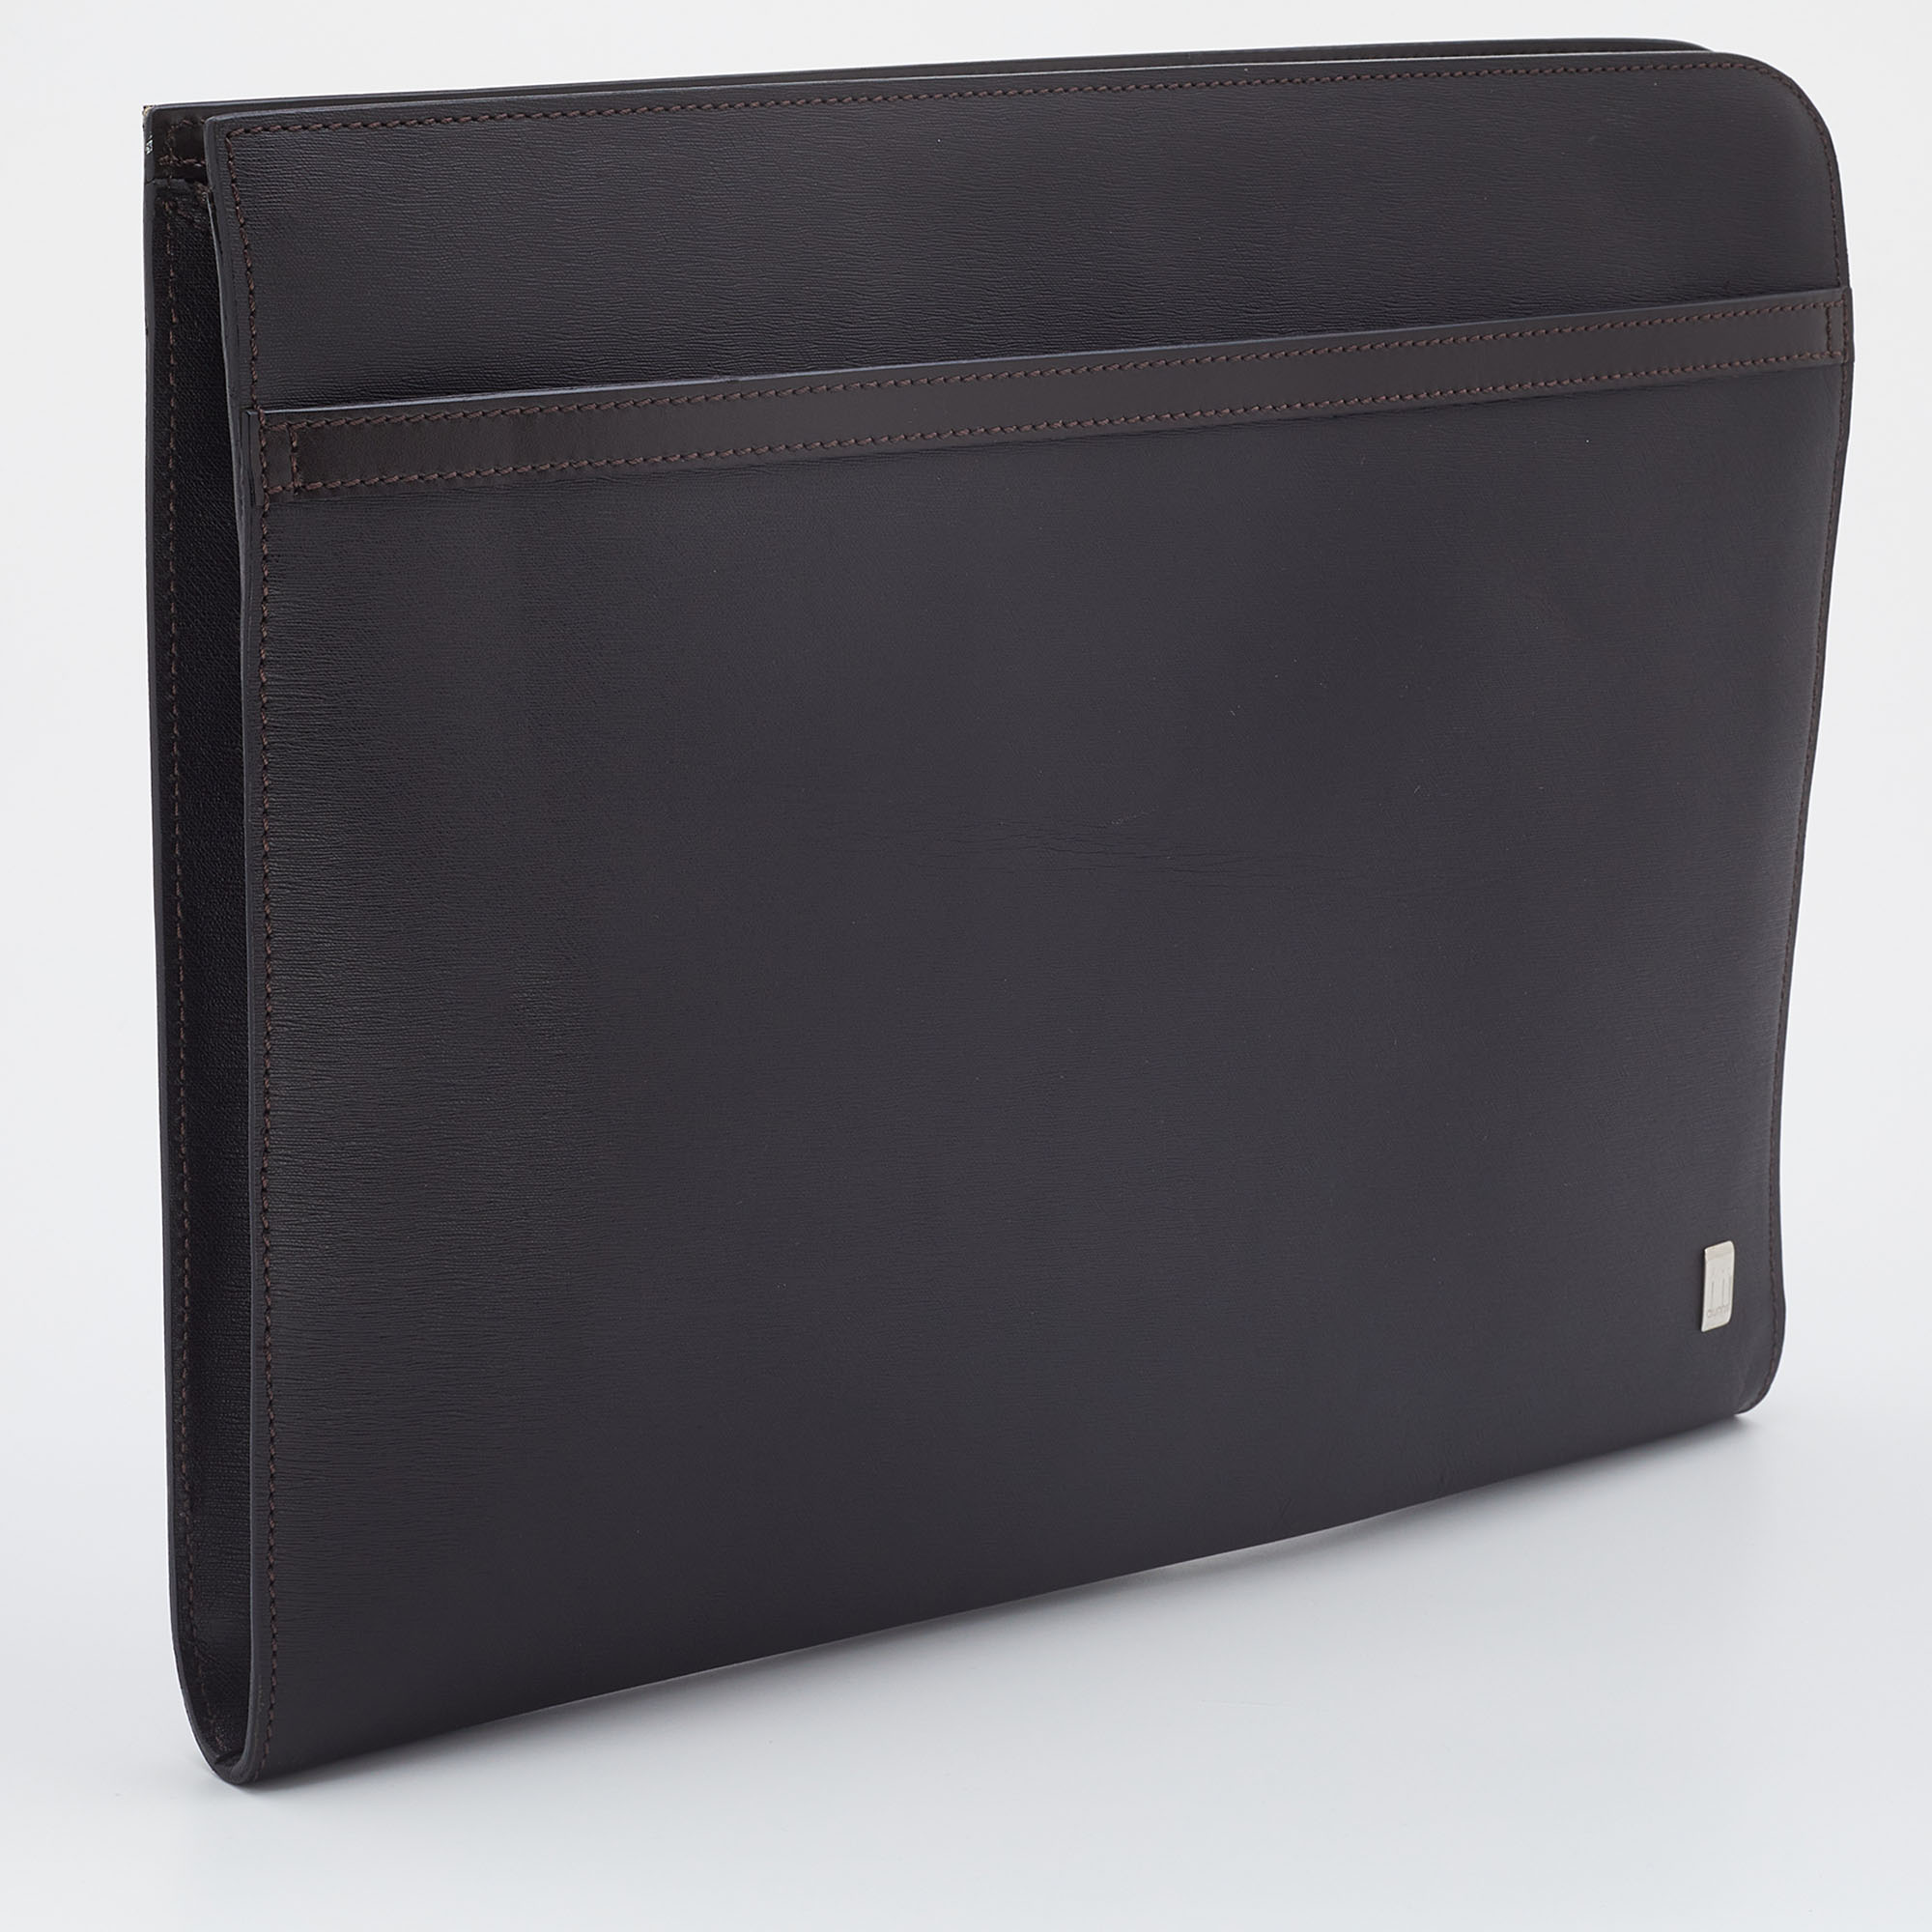 Dunhill Brown Leather Documents Portfolio Case